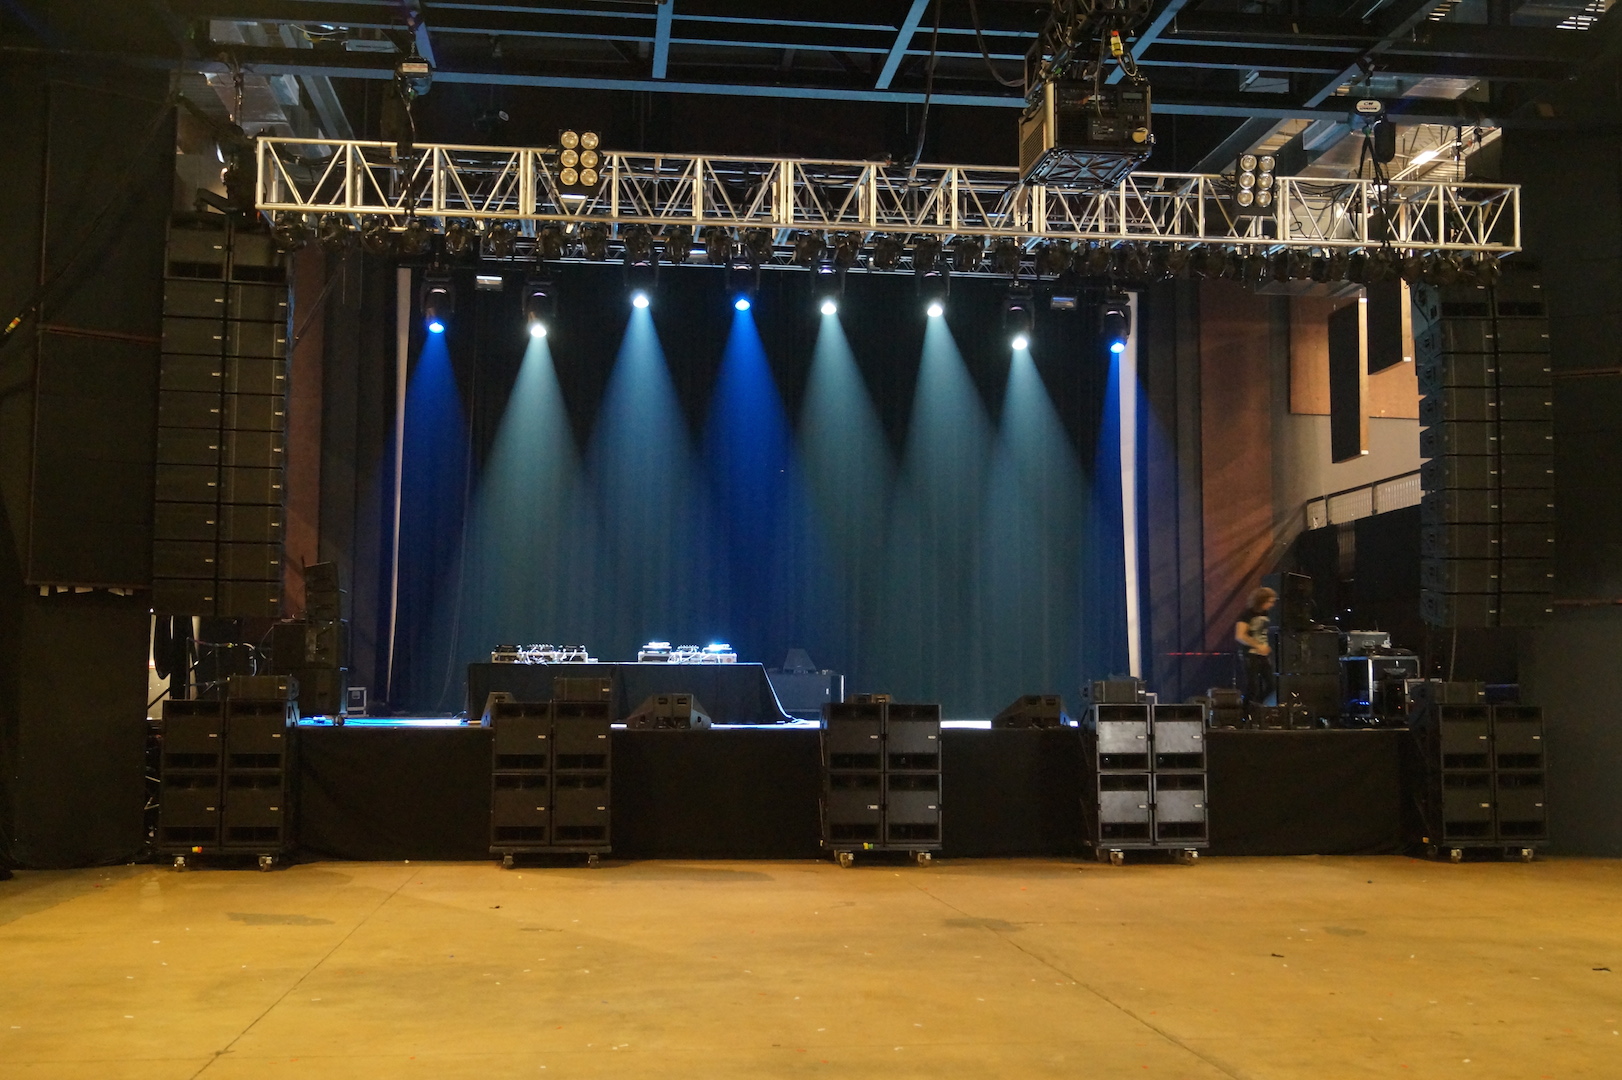 NOMAD SOUND FEATURES STM AND GEO AT SXSW